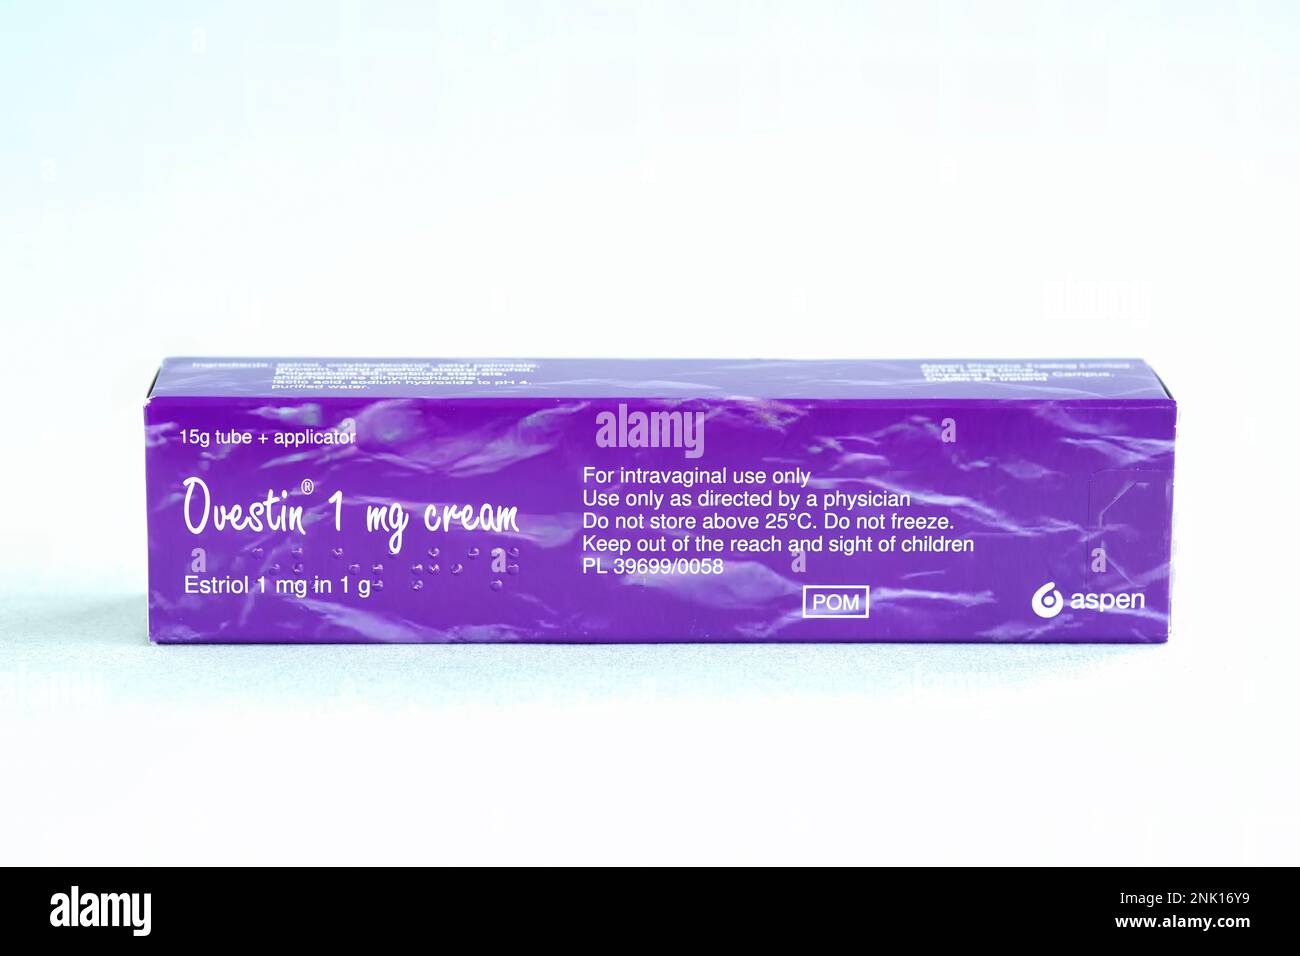 Ovestin cream which contains estriol. The drug is prescribed for vaginal atrophy, post menopausal hormone replacement to alleviate vaginal discomfort Stock Photo